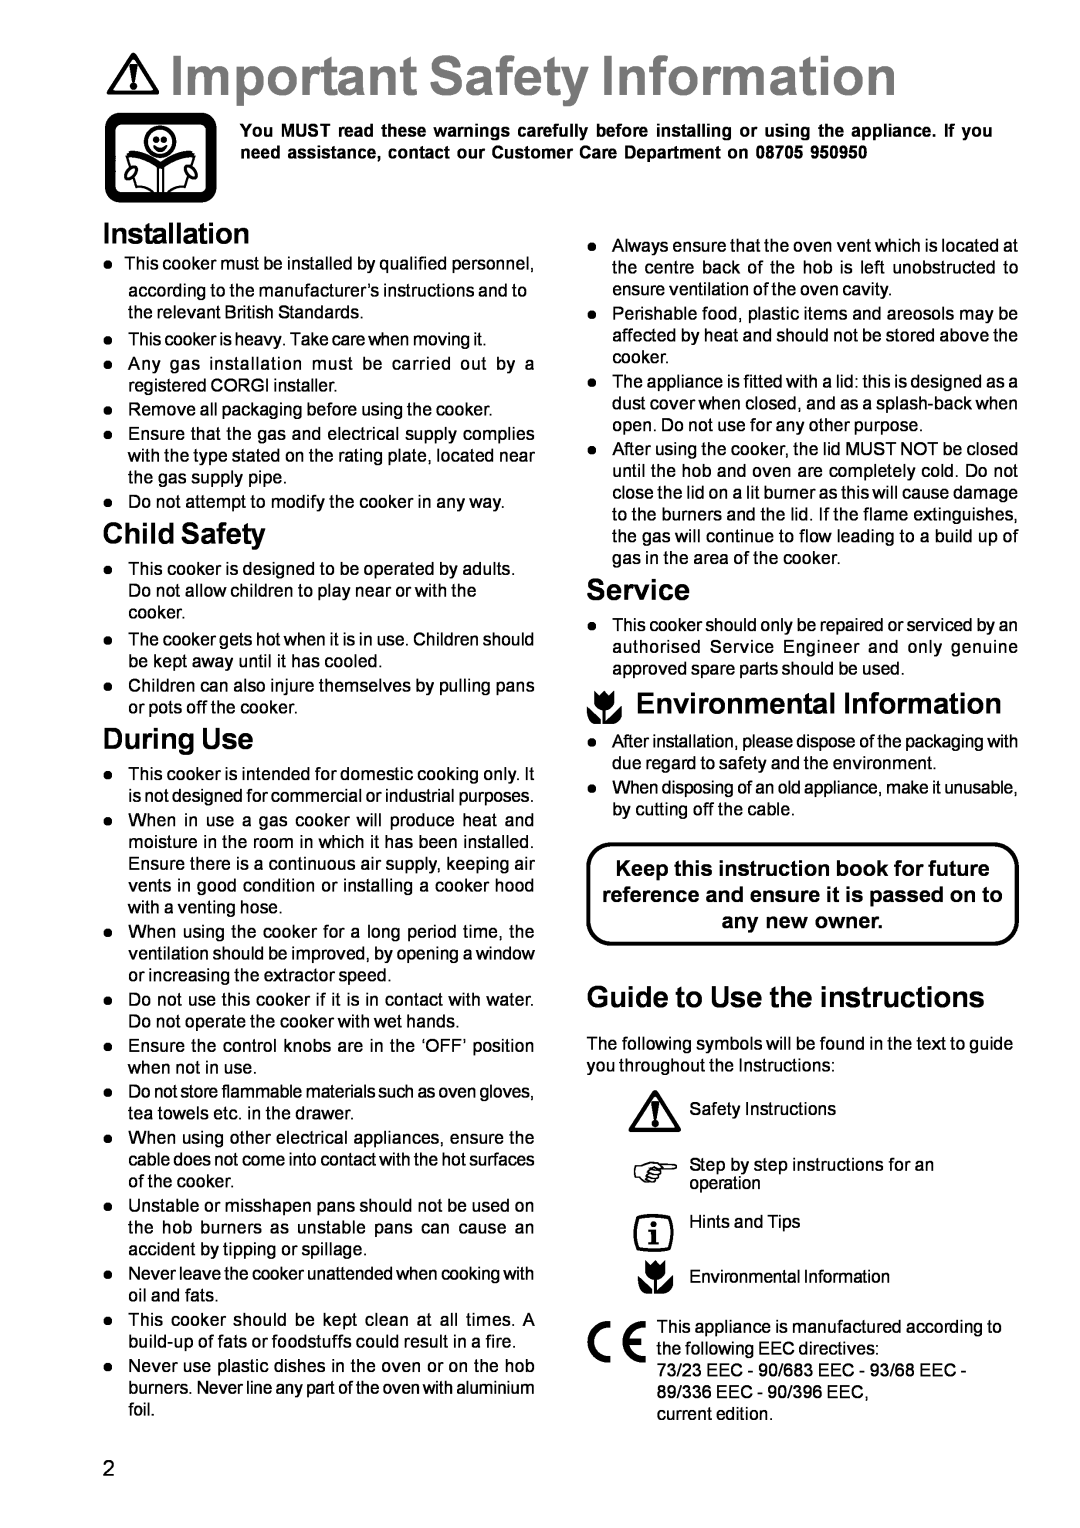 Electrolux CSIG 509 manual Important Safety Information, Installation, Child Safety, During Use, Service 